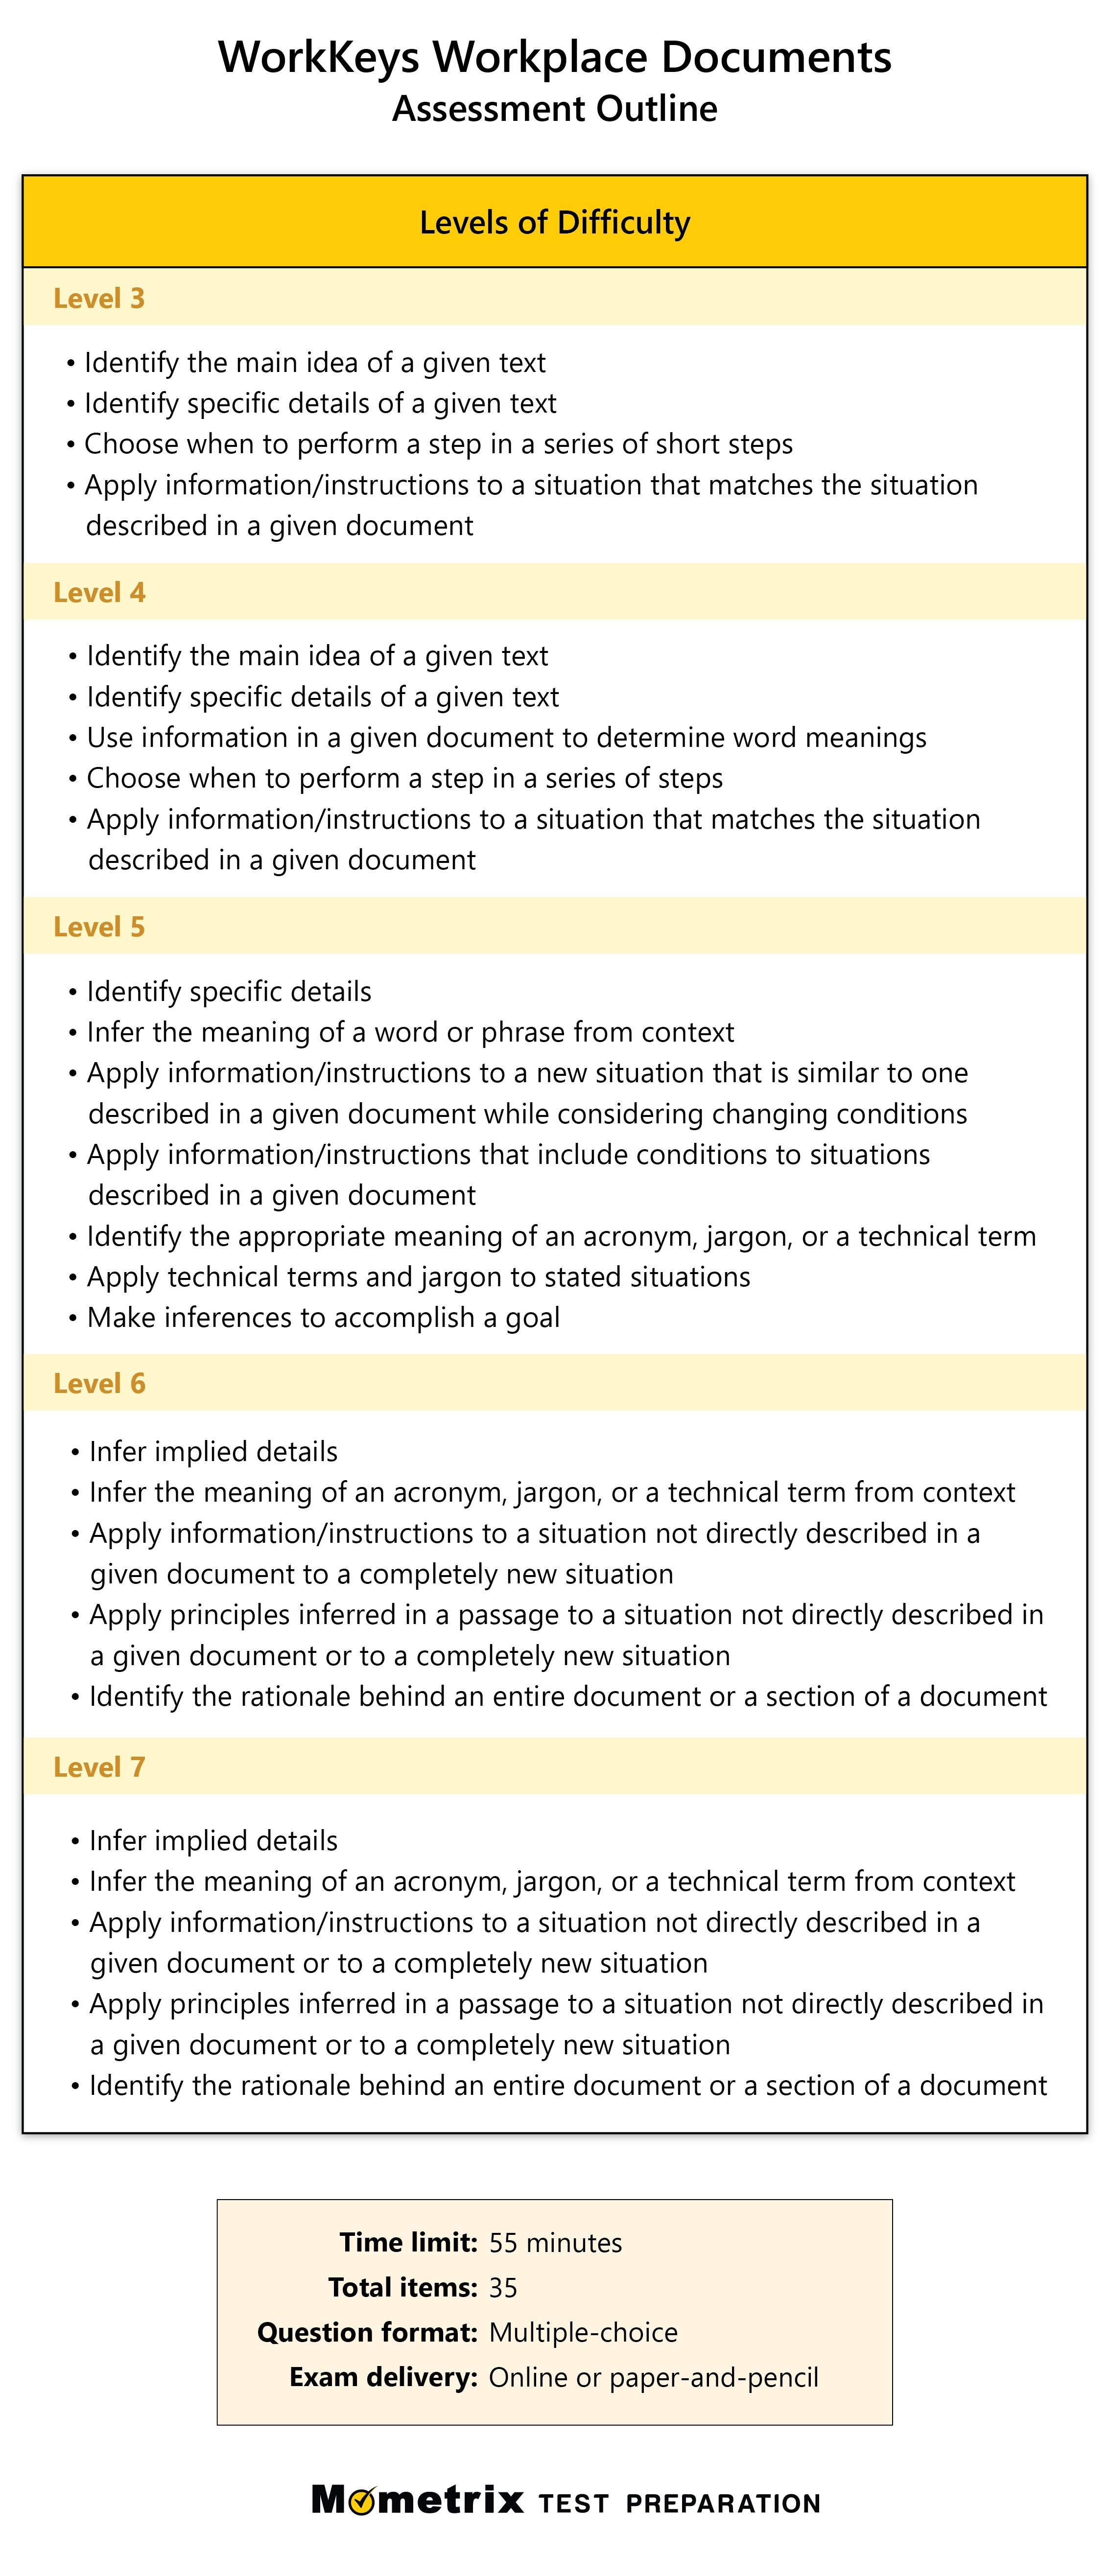 exam outline for the WorkKeys Workplace Documents assessment, which contains 35 items and has a time limit of 55 minutes